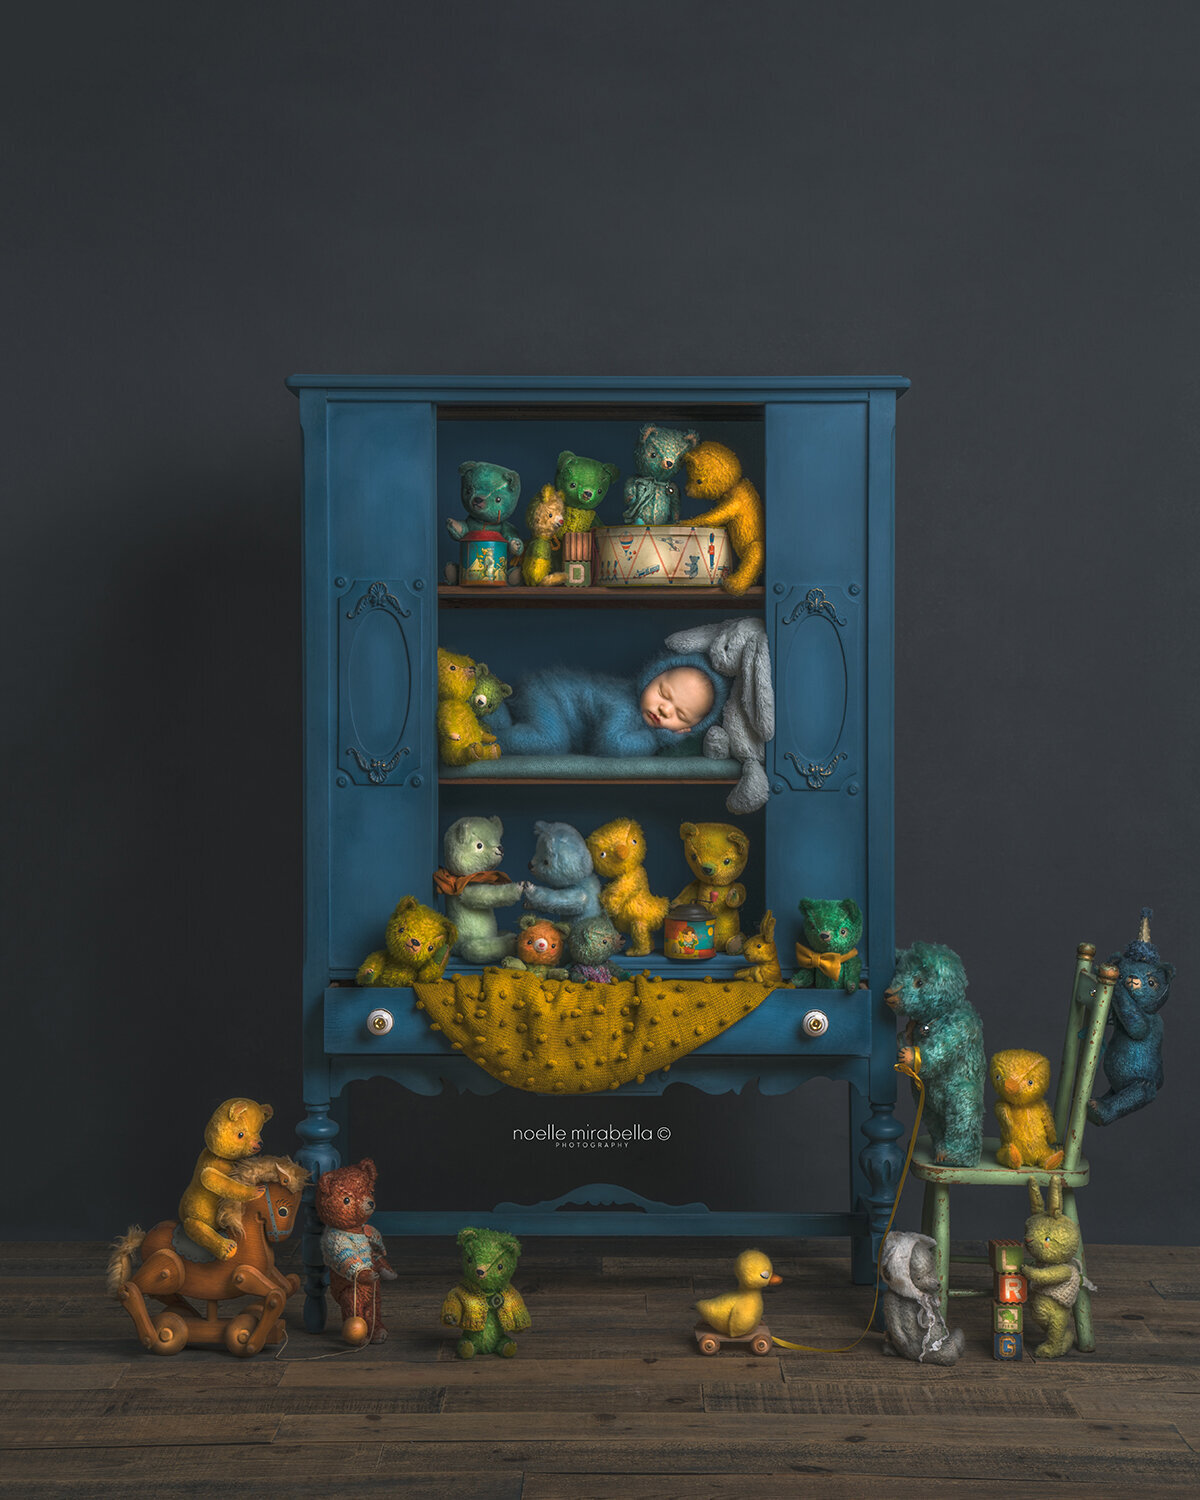 Blue vinatge cabinet full of bears with a sleeping baby on the shelf.